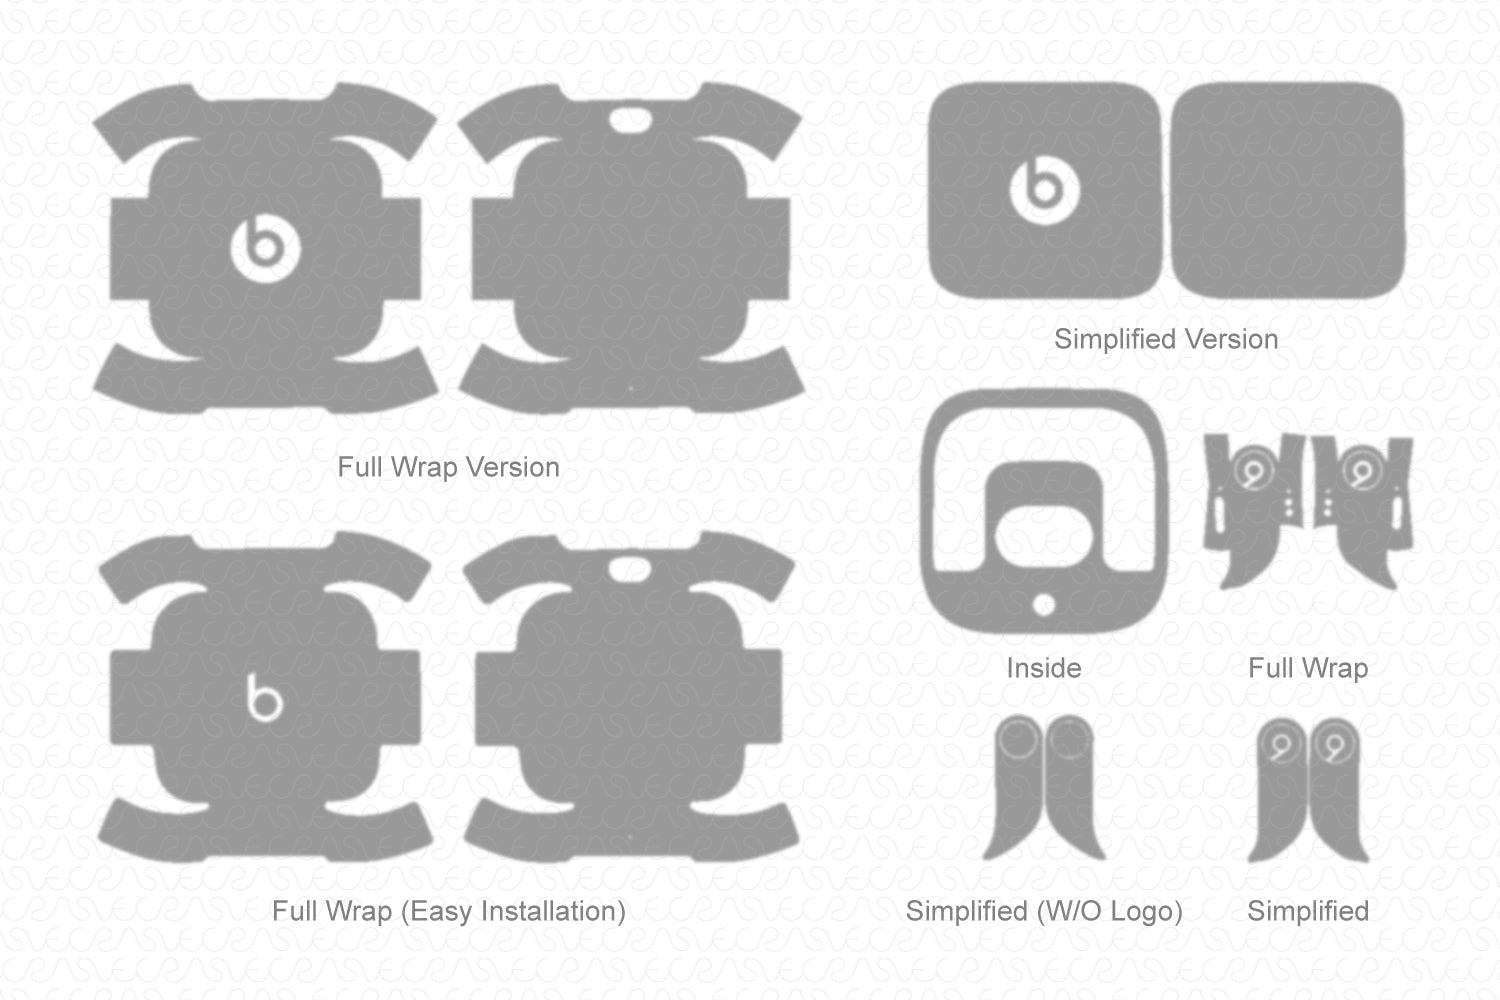 Download Apple Airpod Pro Skin Cover Svg Cut Template Vector Silhouette Airpods Pro Skin Cut File Template Vector Vinyl File Cricut Decals Skins Electronics Accessories Keyforrest Lt